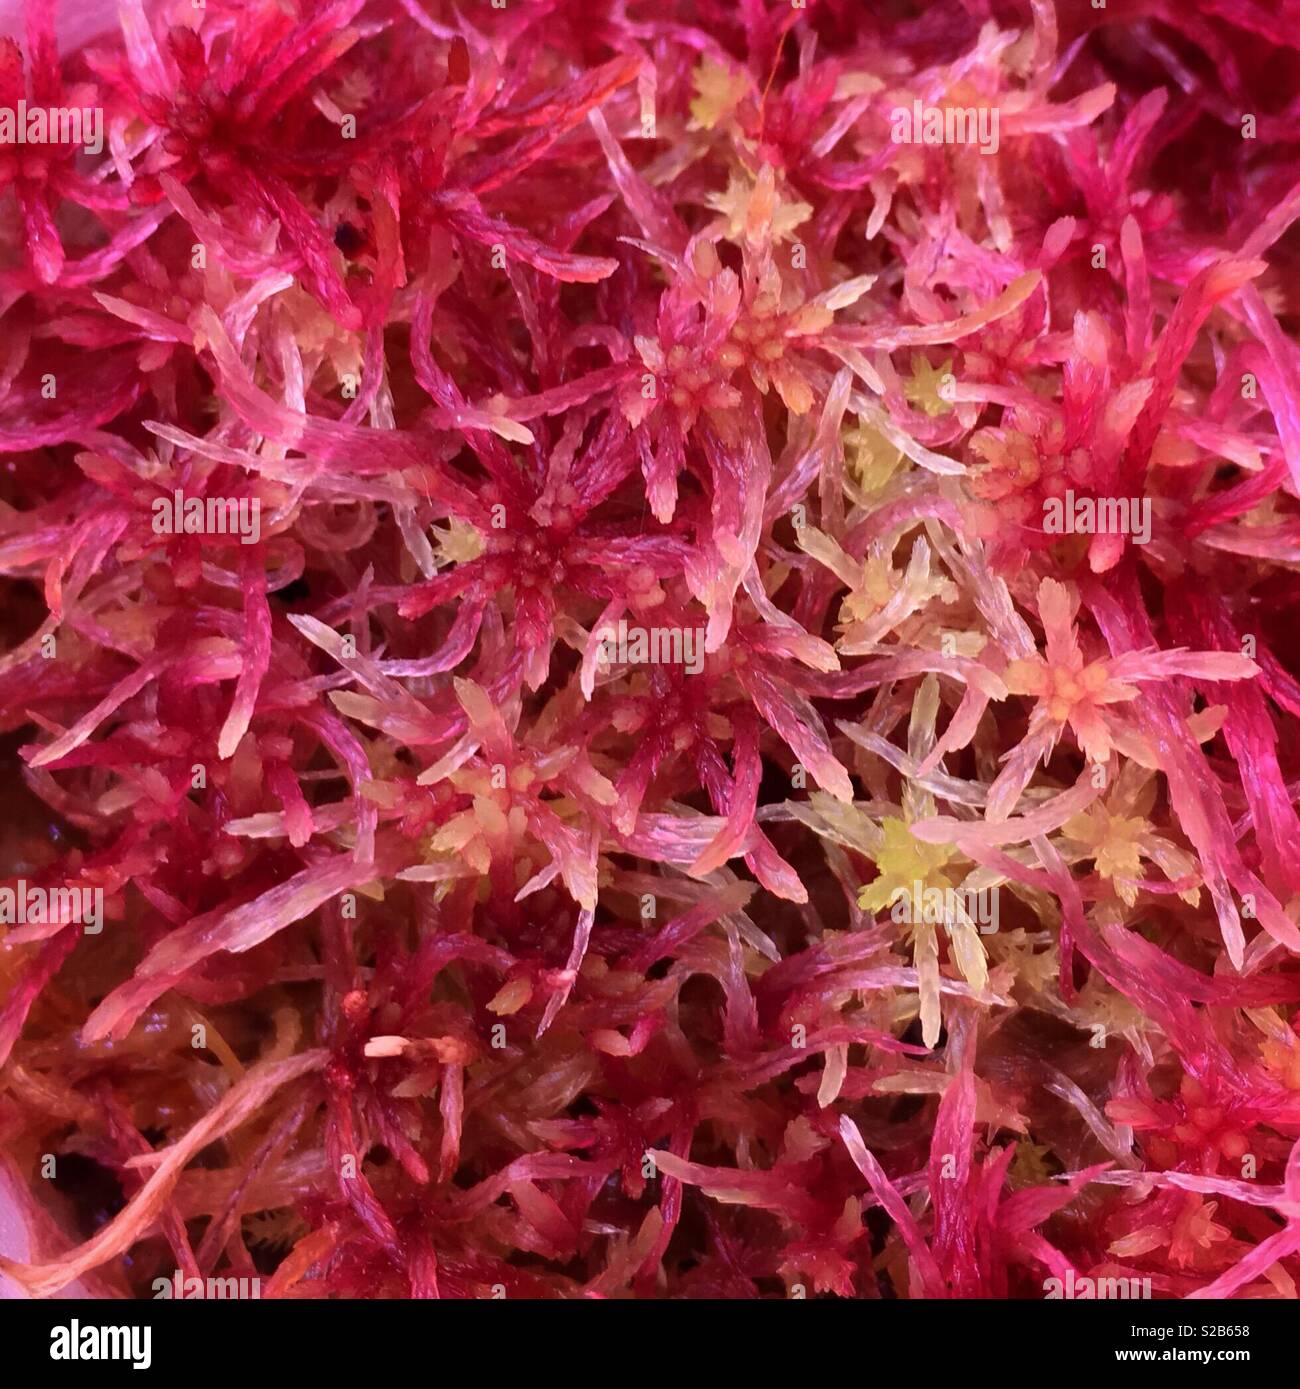 Red Live Sphagnum Moss Stock Photo